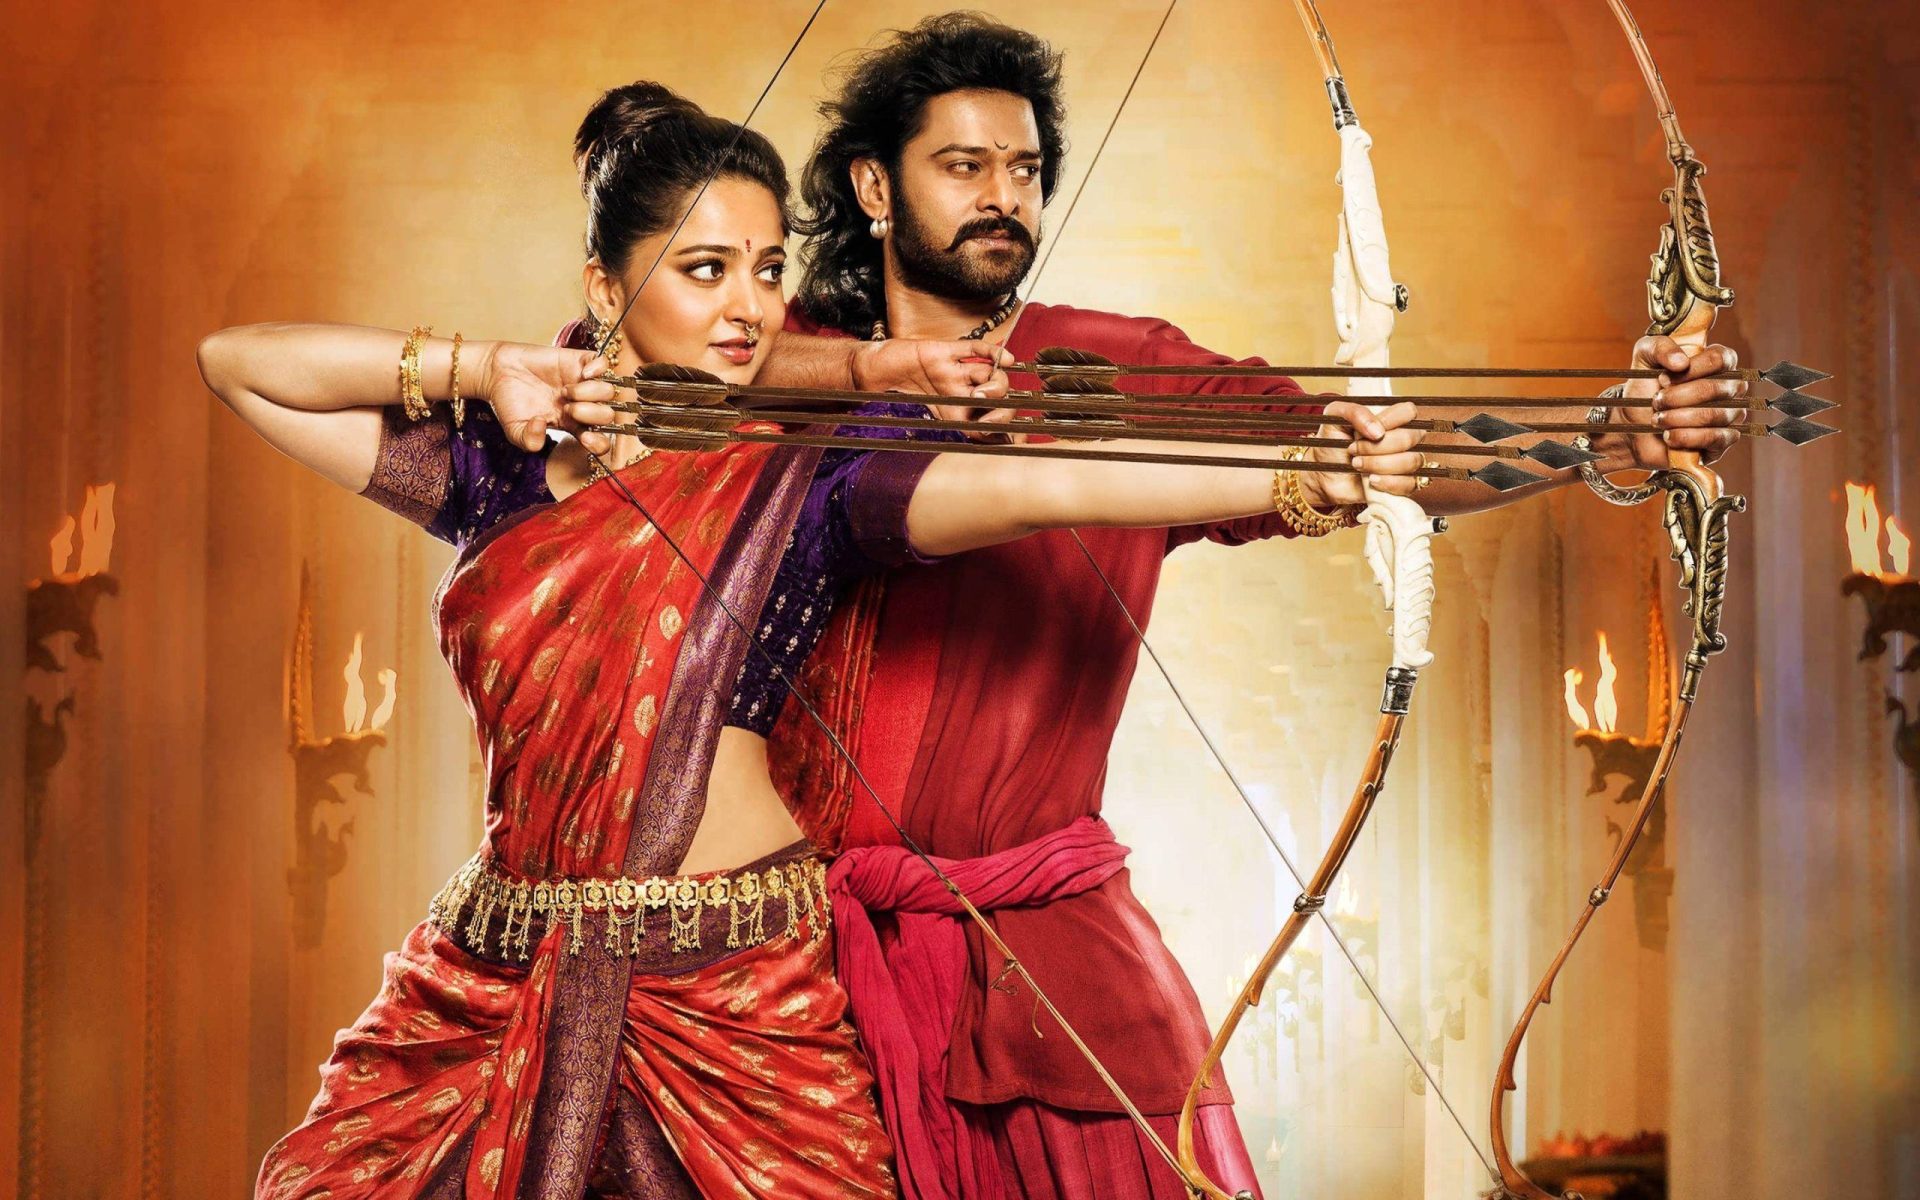 Download wallpaper Baahubali 2 The Conclusion, drama, 2017 movie